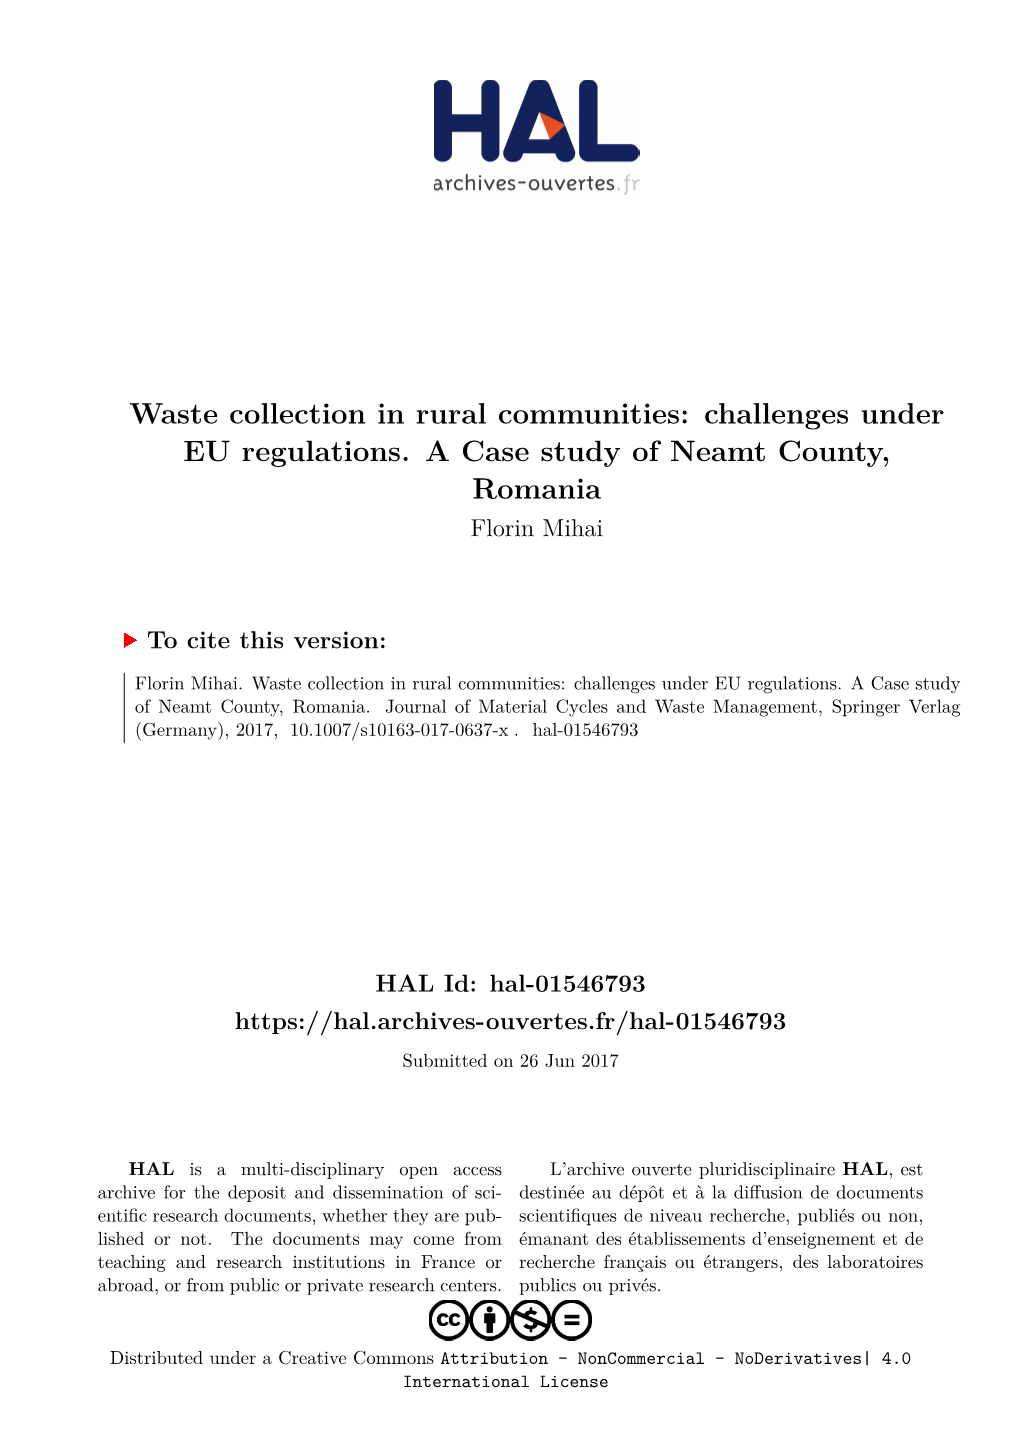 Waste Collection in Rural Communities: Challenges Under EU Regulations. a Case Study of Neamt County, Romania Florin Mihai